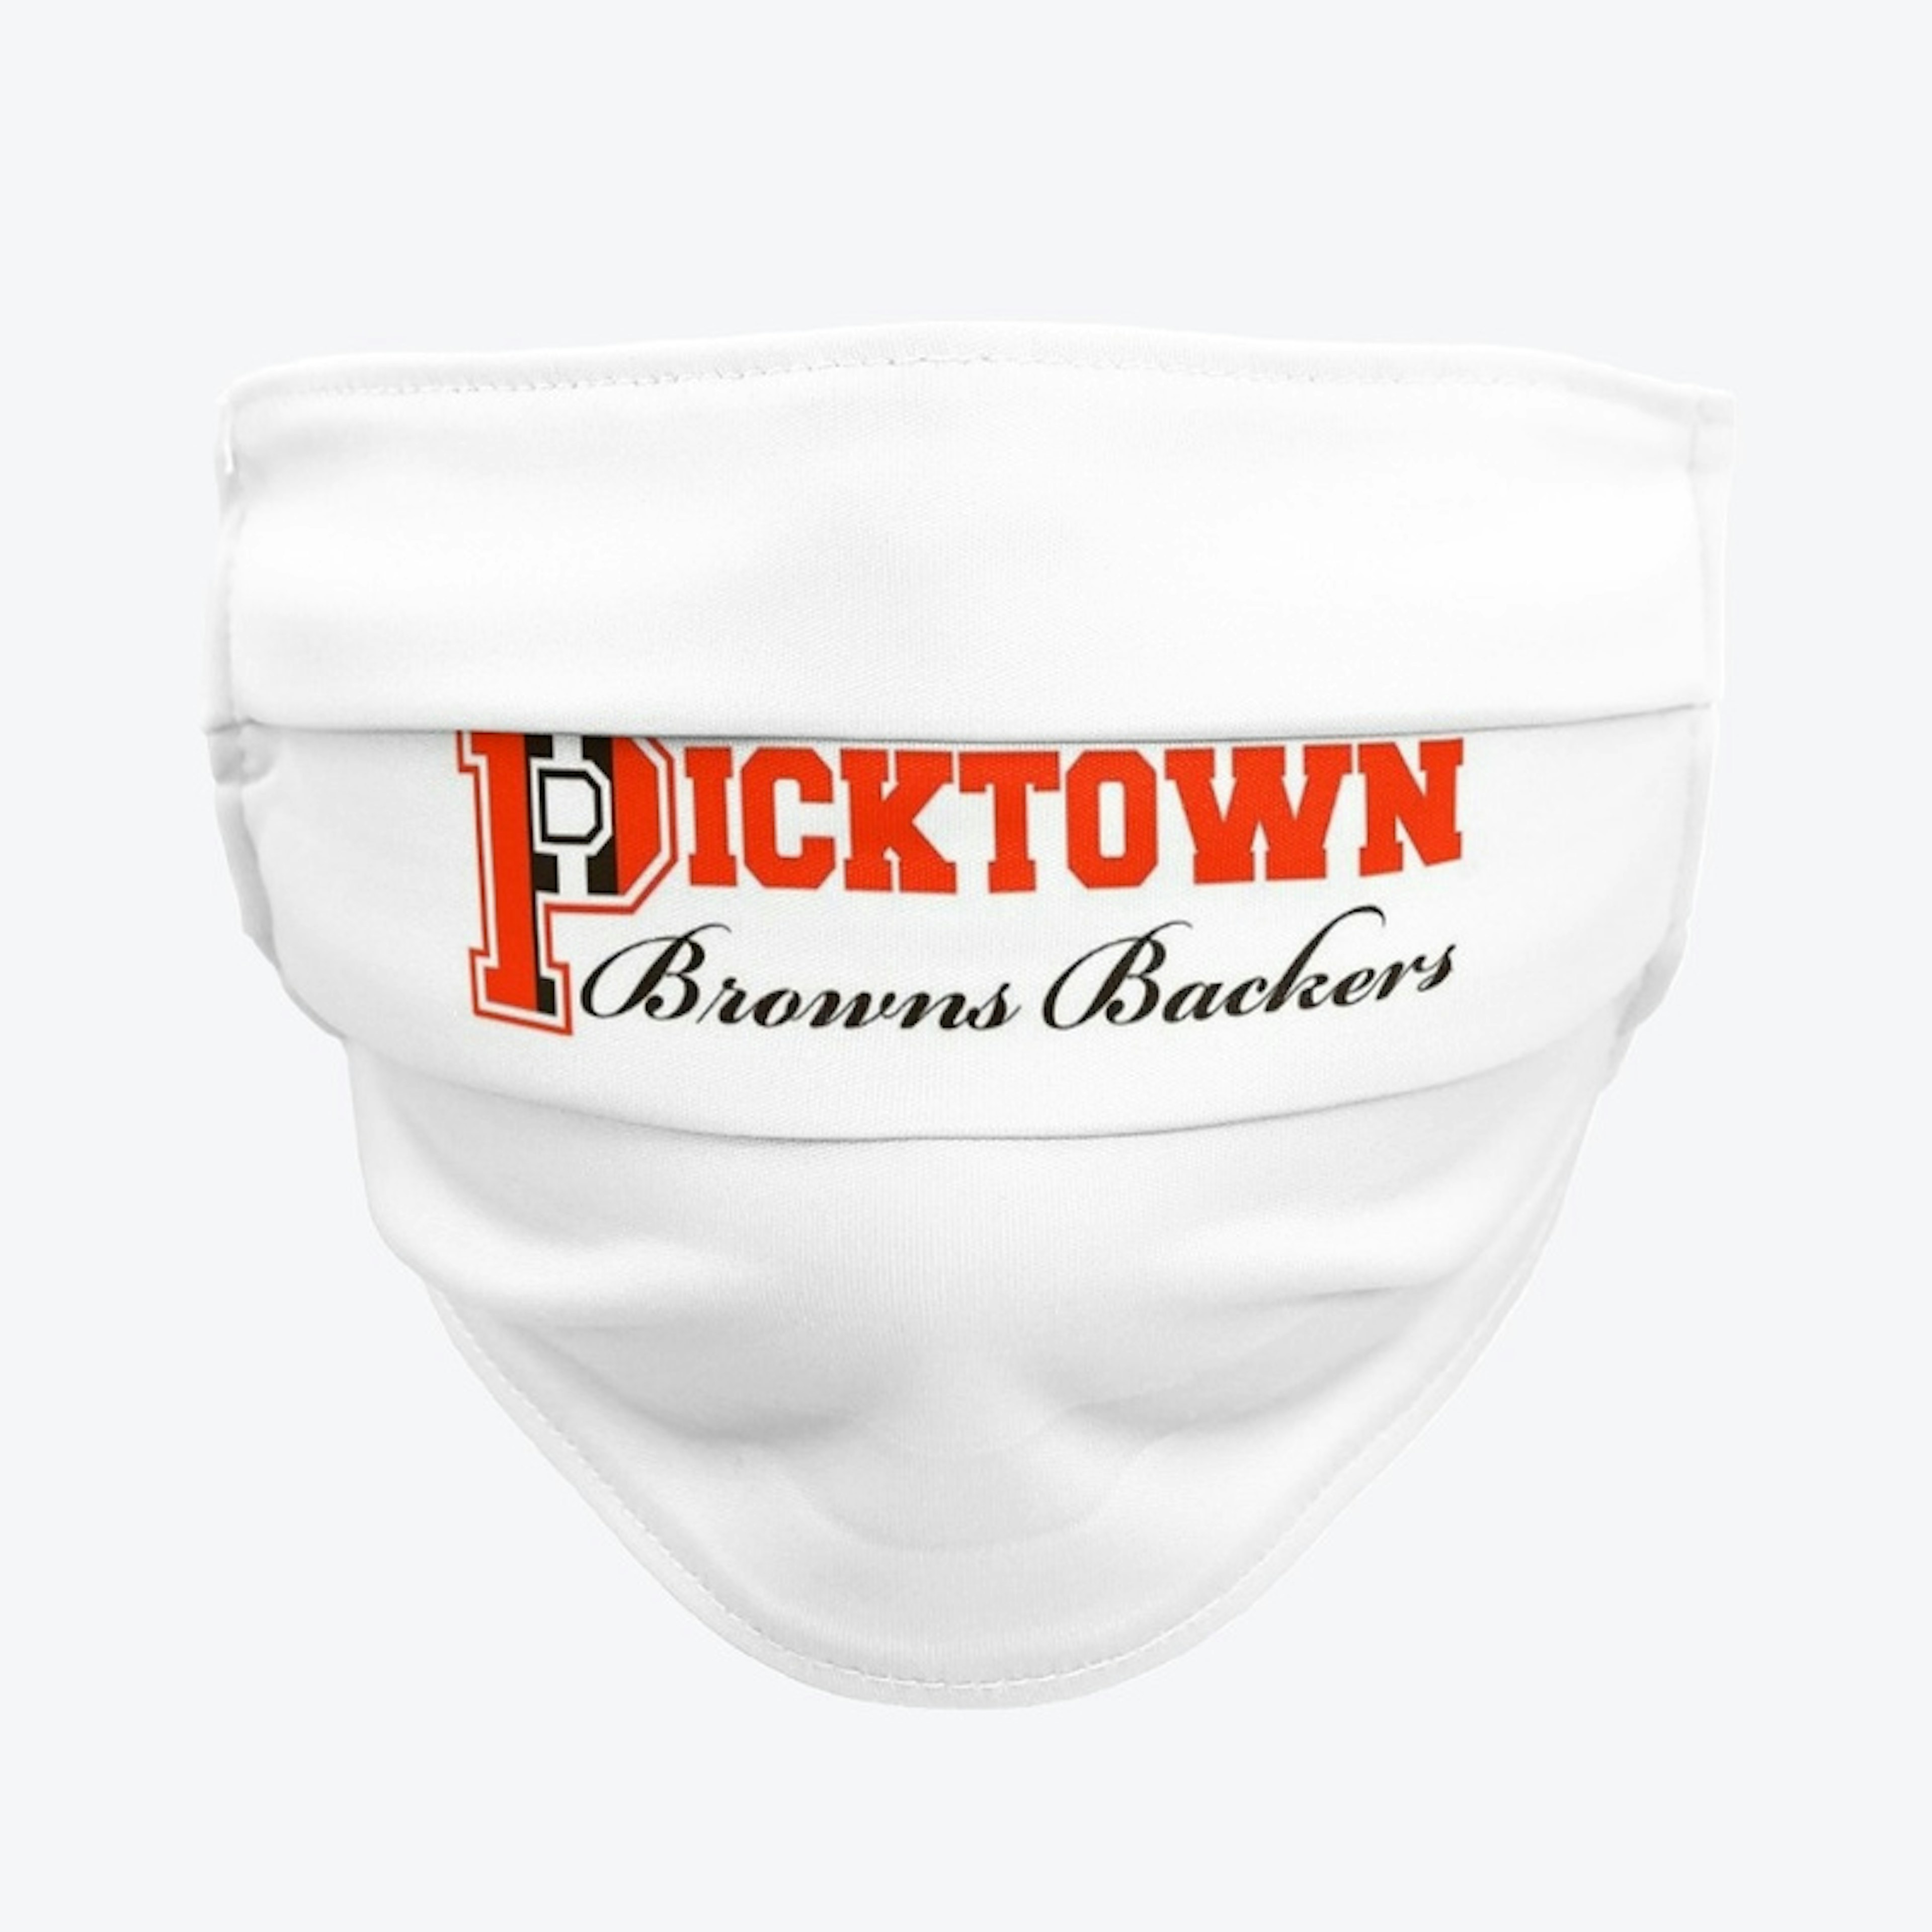 Picktown Browns Backers Official gear